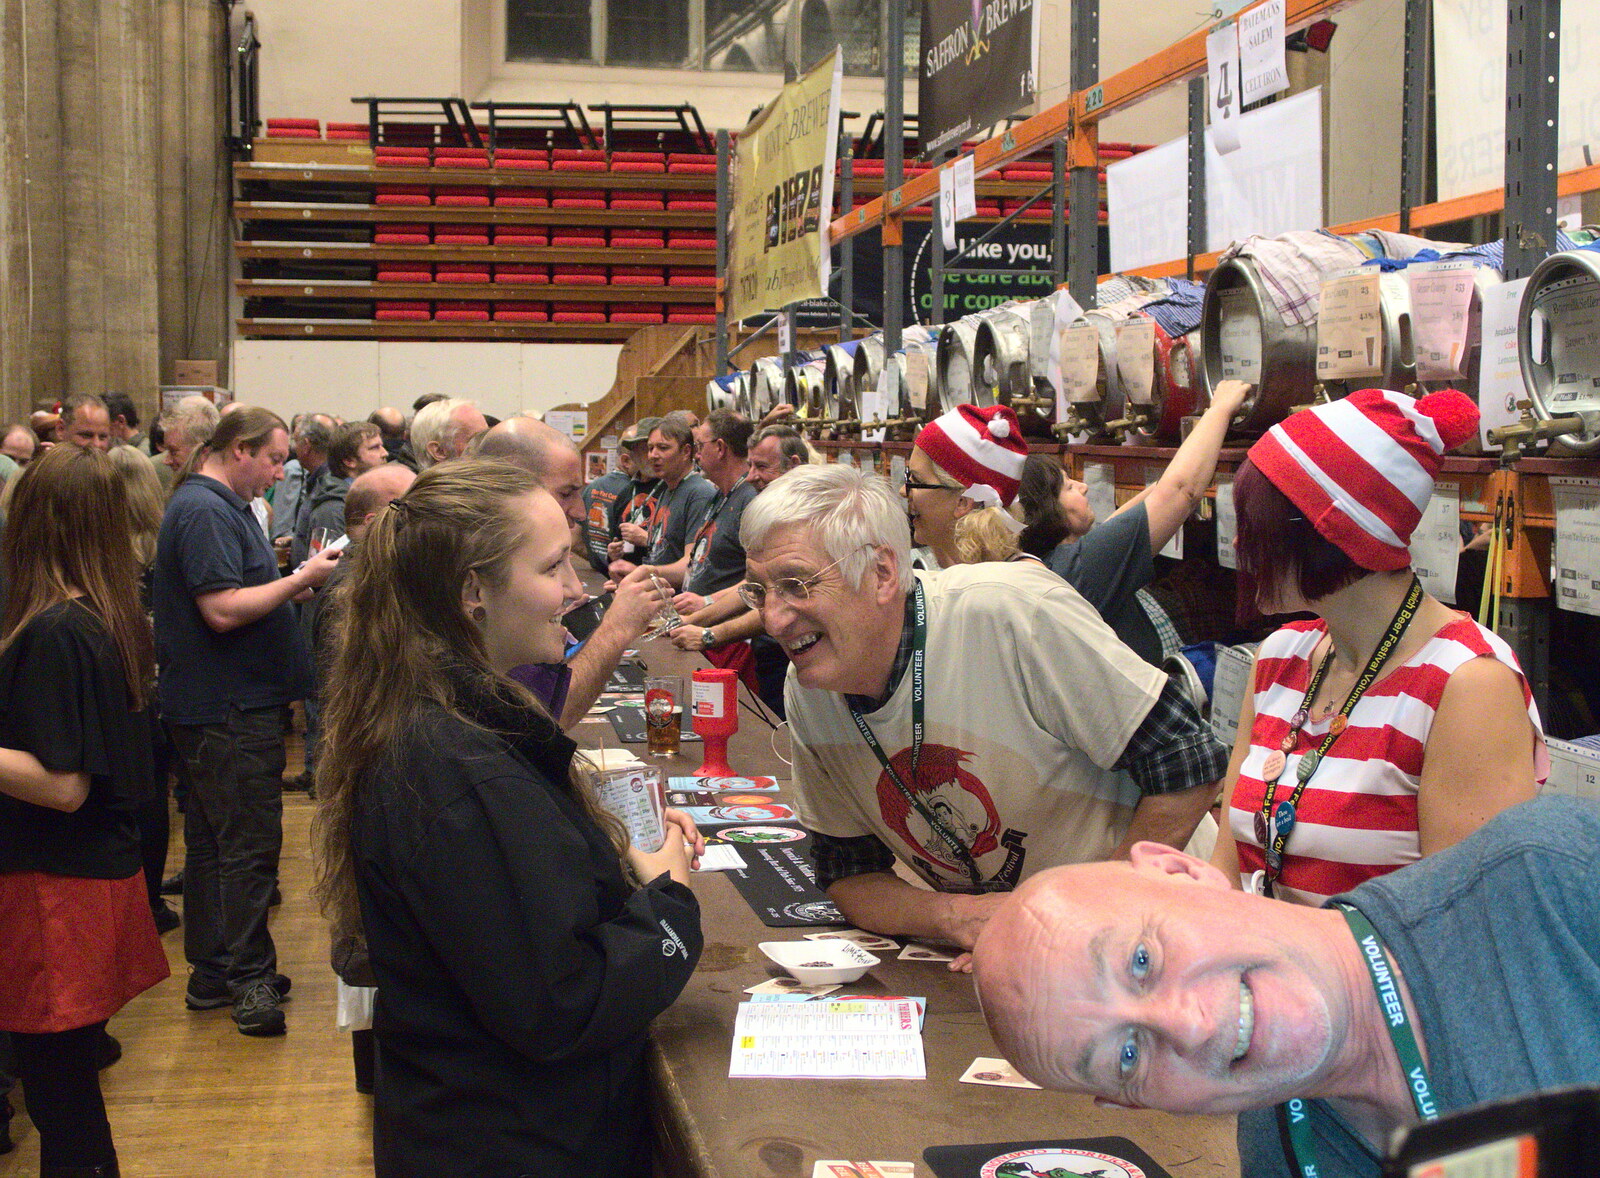 Comedy photo-bombing from The 38th Norwich Beer Festival, Norwich, Norfolk - 28th October 2015